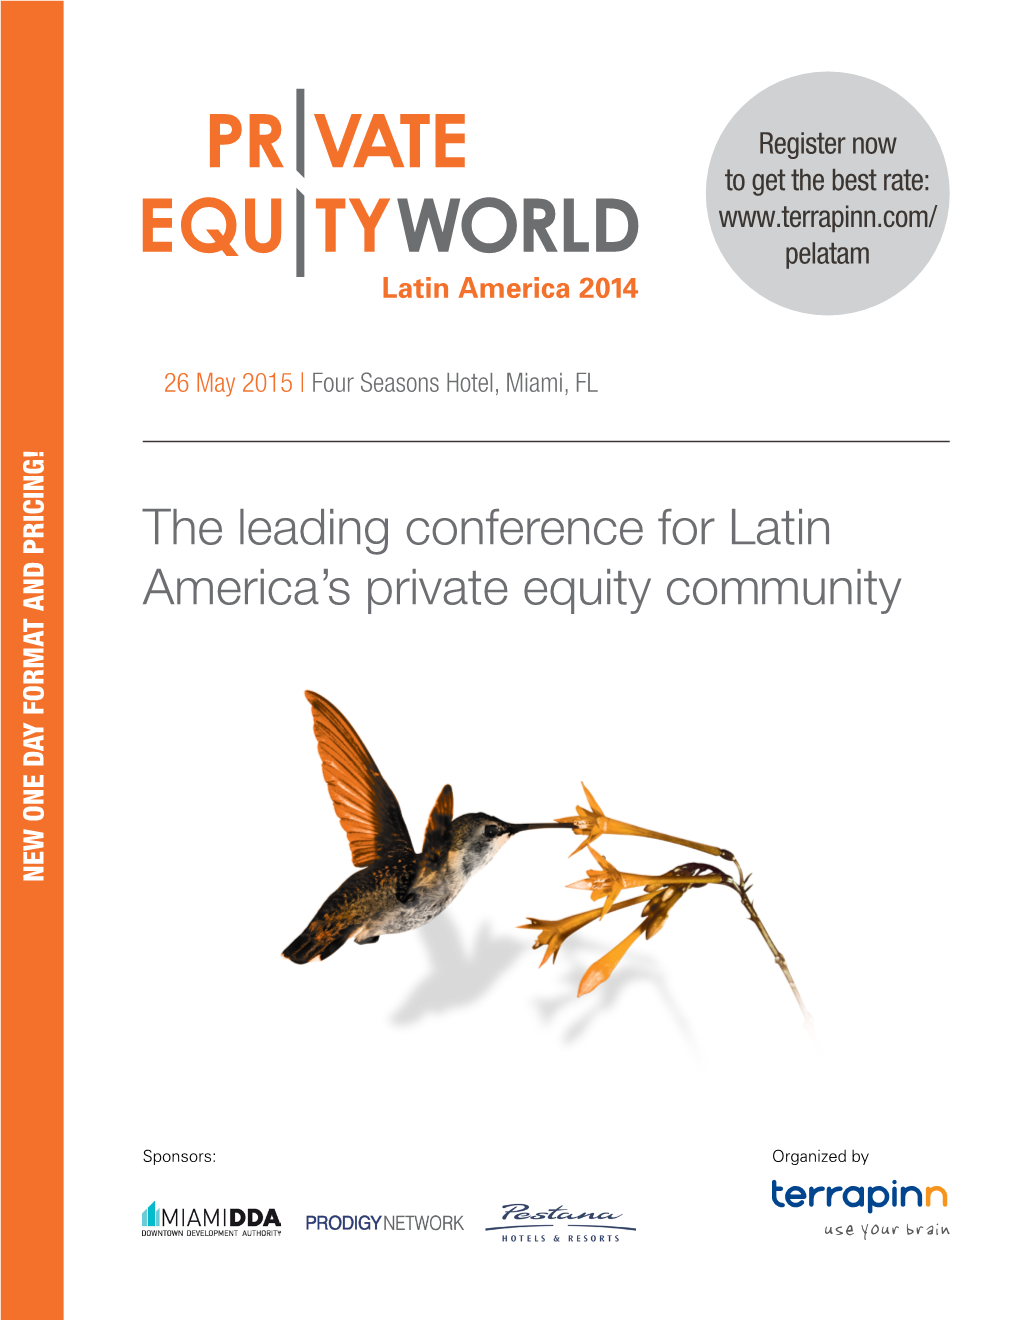 The Leading Conference for Latin America's Private Equity Community